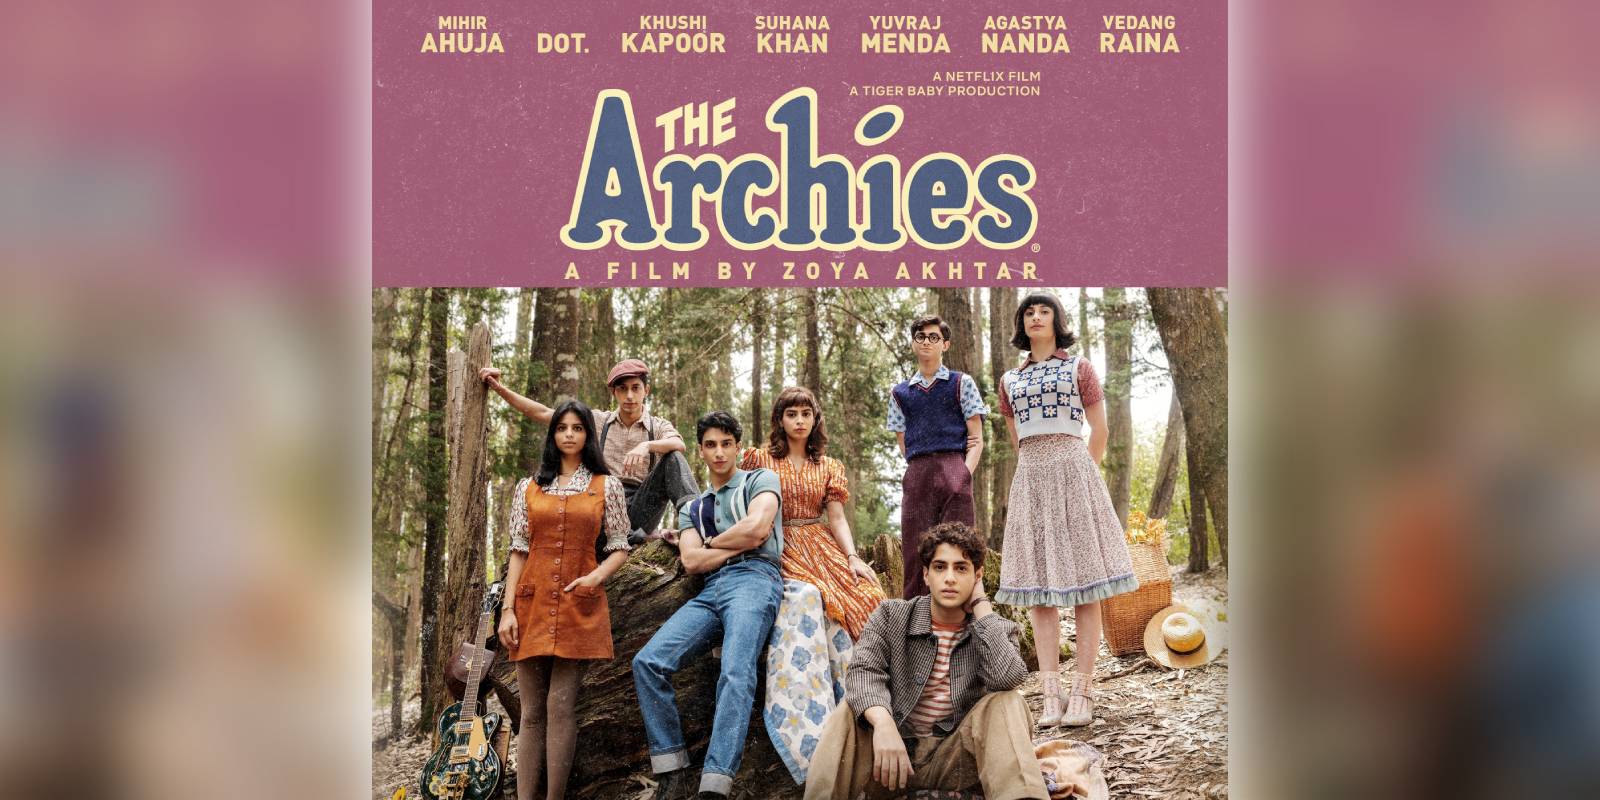 A poster of the film Archies